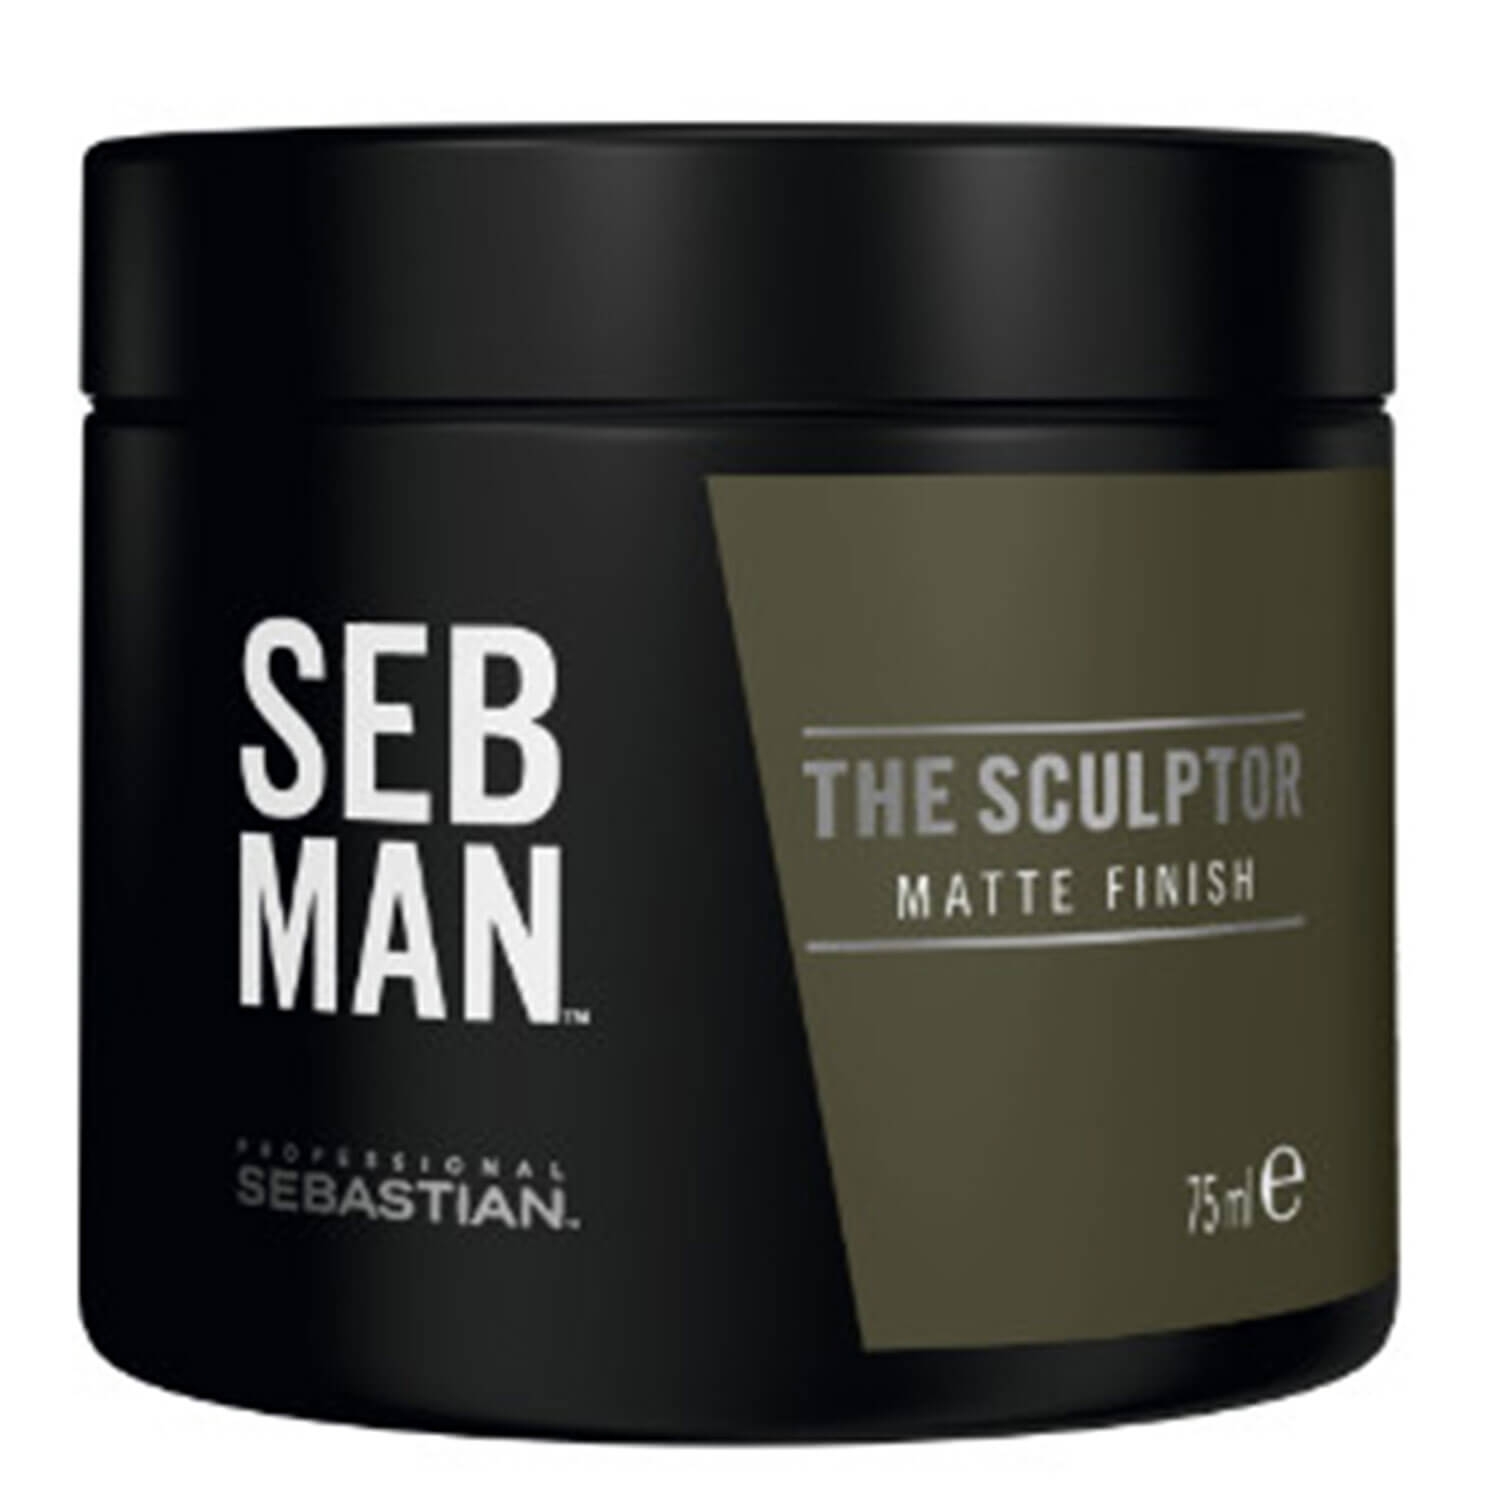 Product image from SEB MAN - The Sculptor Matte Finish